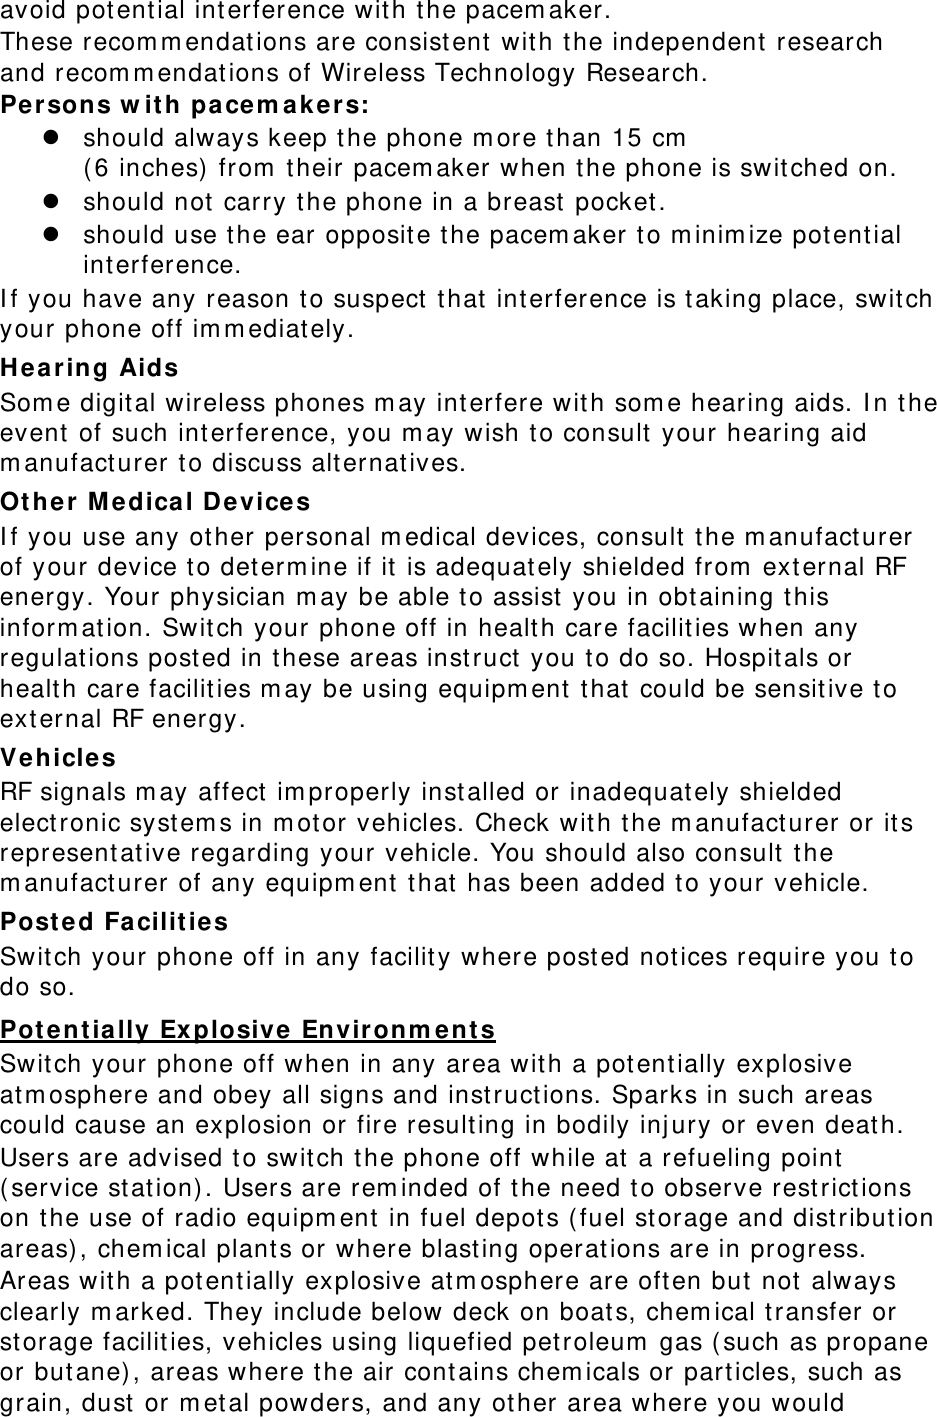 avoid potential interference with the pacemaker. These recommendations are consistent with the independent research and recommendations of Wireless Technology Research. Persons with pacemakers:  should always keep the phone more than 15 cm  (6 inches) from their pacemaker when the phone is switched on.  should not carry the phone in a breast pocket.  should use the ear opposite the pacemaker to minimize potential interference. If you have any reason to suspect that interference is taking place, switch your phone off immediately. Hearing Aids Some digital wireless phones may interfere with some hearing aids. In the event of such interference, you may wish to consult your hearing aid manufacturer to discuss alternatives. Other Medical Devices If you use any other personal medical devices, consult the manufacturer of your device to determine if it is adequately shielded from external RF energy. Your physician may be able to assist you in obtaining this information. Switch your phone off in health care facilities when any regulations posted in these areas instruct you to do so. Hospitals or health care facilities may be using equipment that could be sensitive to external RF energy. Vehicles RF signals may affect improperly installed or inadequately shielded electronic systems in motor vehicles. Check with the manufacturer or its representative regarding your vehicle. You should also consult the manufacturer of any equipment that has been added to your vehicle. Posted Facilities Switch your phone off in any facility where posted notices require you to do so. Potentially Explosive Environments Switch your phone off when in any area with a potentially explosive atmosphere and obey all signs and instructions. Sparks in such areas could cause an explosion or fire resulting in bodily injury or even death. Users are advised to switch the phone off while at a refueling point (service station). Users are reminded of the need to observe restrictions on the use of radio equipment in fuel depots (fuel storage and distribution areas), chemical plants or where blasting operations are in progress. Areas with a potentially explosive atmosphere are often but not always clearly marked. They include below deck on boats, chemical transfer or storage facilities, vehicles using liquefied petroleum gas (such as propane or butane), areas where the air contains chemicals or particles, such as grain, dust or metal powders, and any other area where you would 